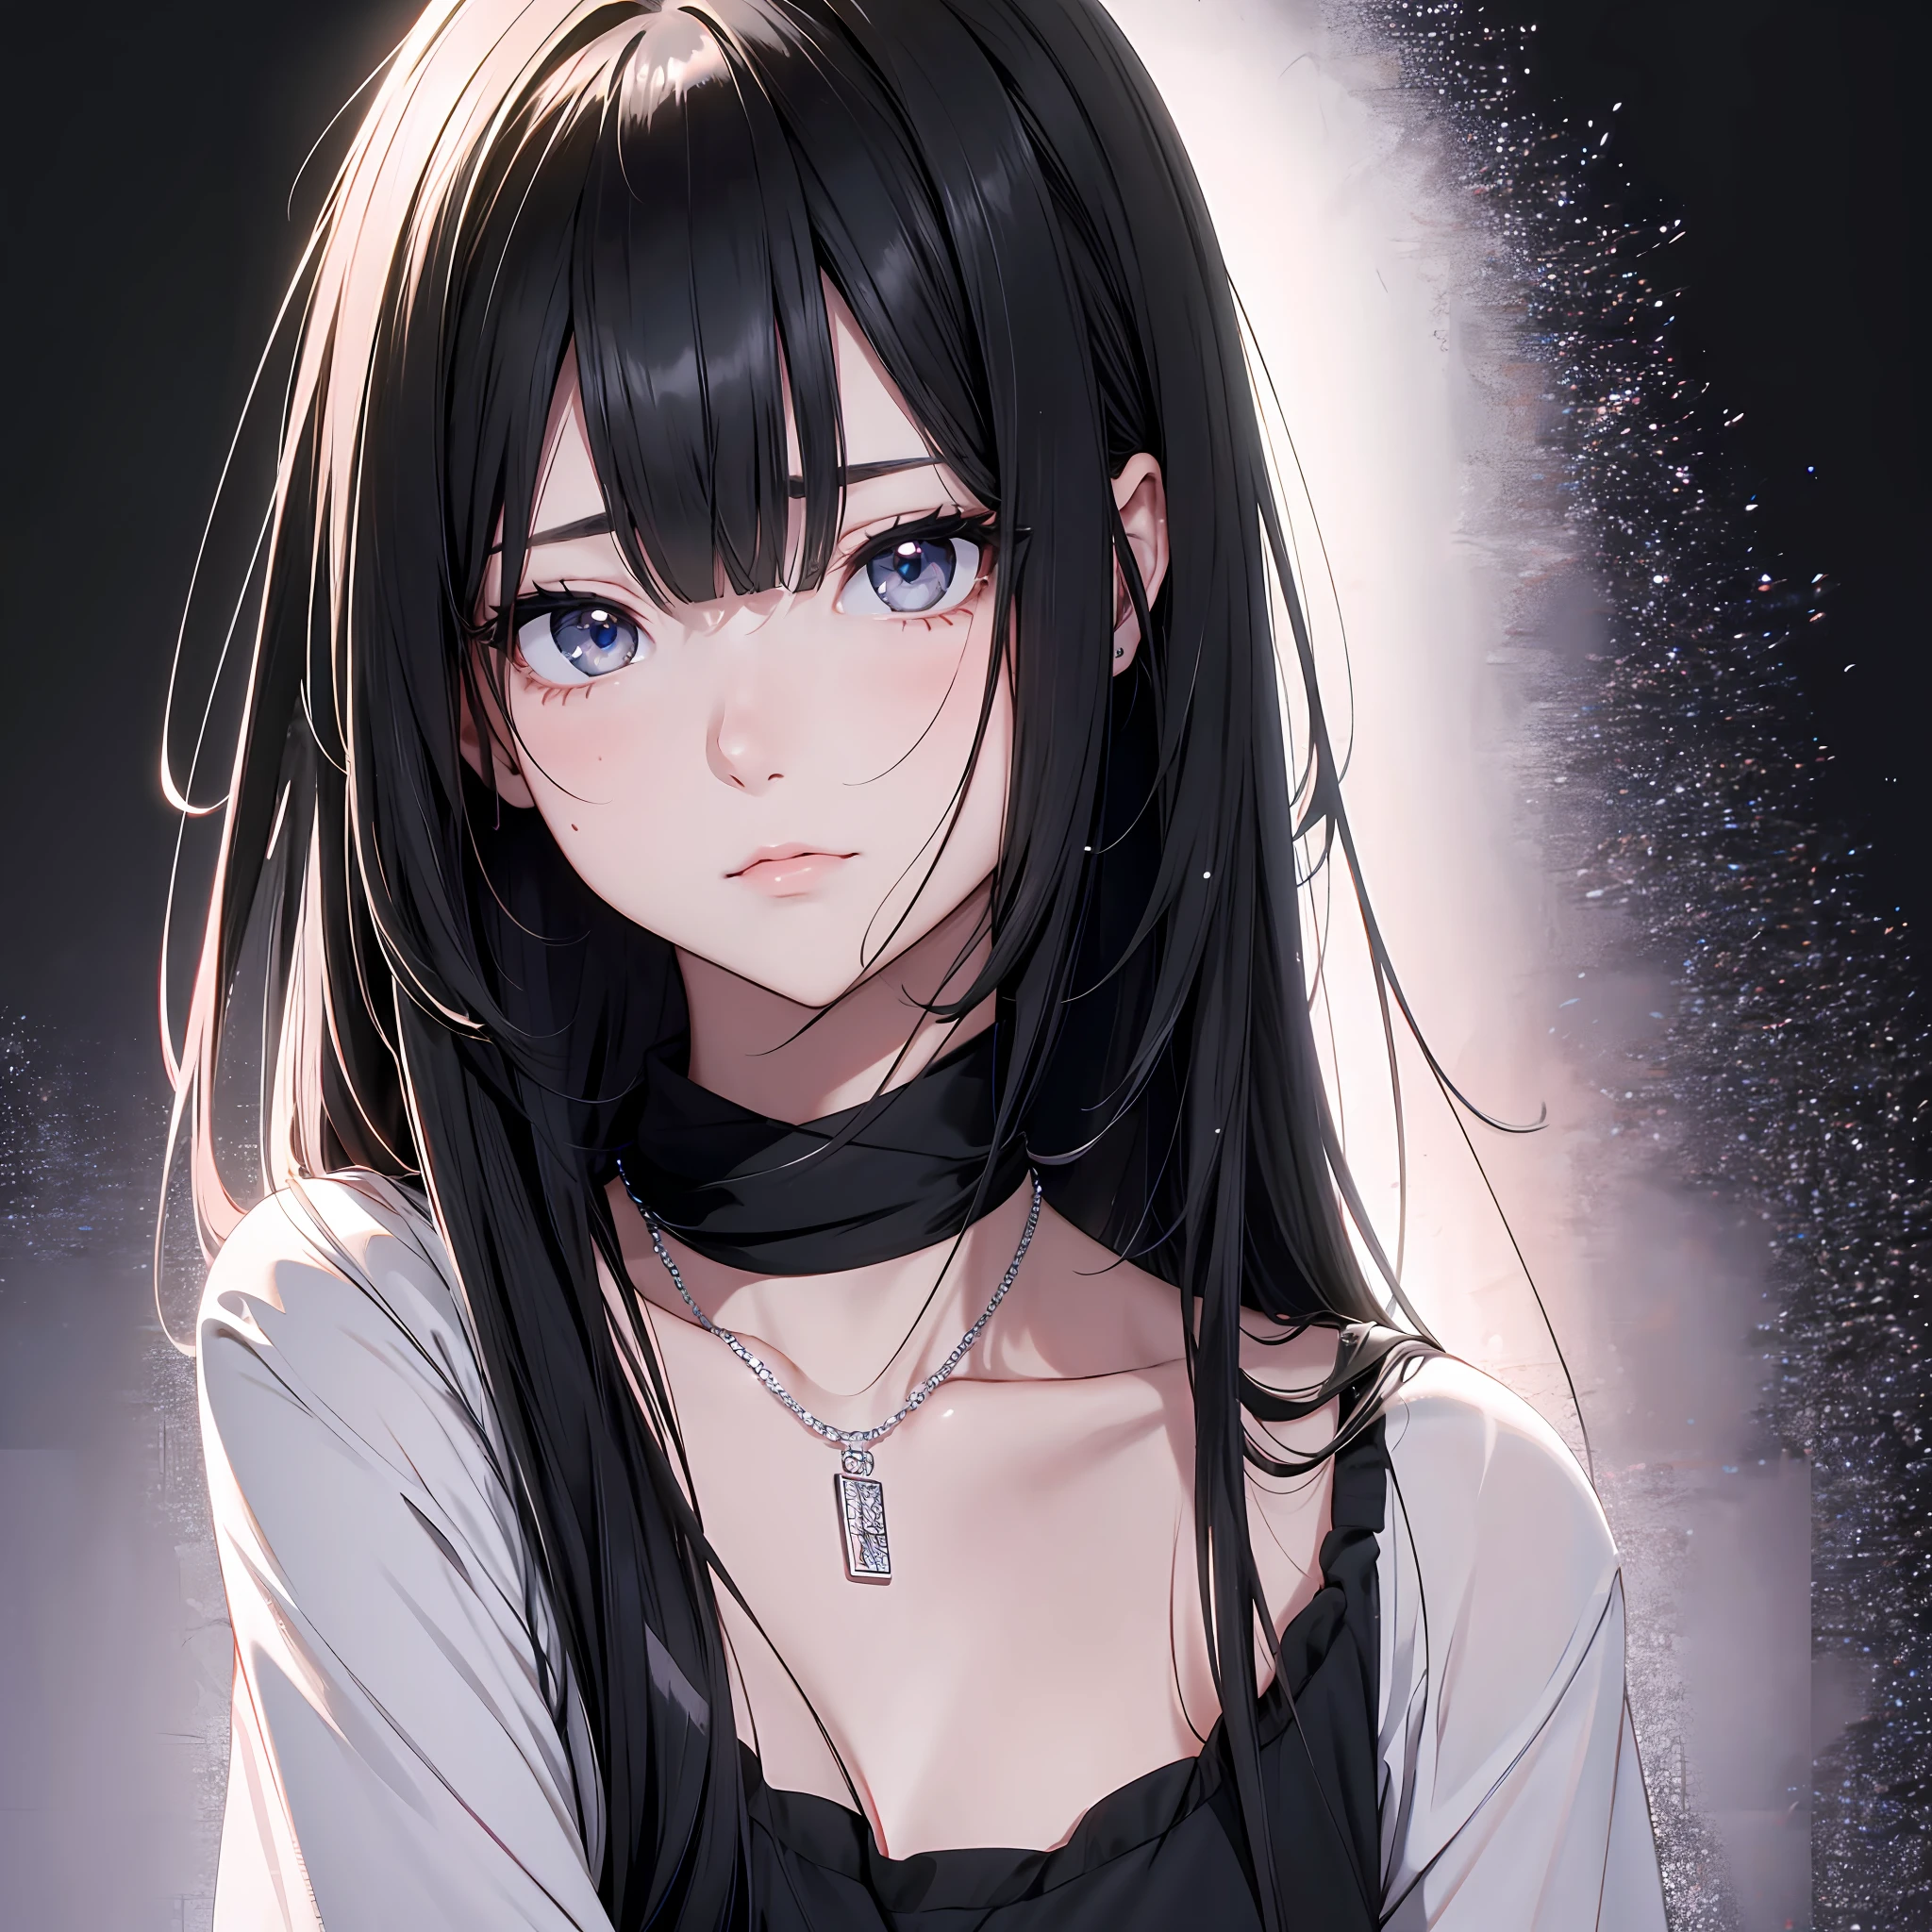 Cute adult girl standing, girl focus, (Full body close-up), ((Plain black background)), pokerface, upright immovable, (1girl in:1.3), Bangs, a necklace, facing front, （black cloth ), Crystal gray Eyes, slender, masterful technique, Long hair, animetic, Solo, bright black hair, Masterpiece, ultra detail, [wide-hips], Beautiful Girl, (Detail Face), detail hands, ultra detail eyes, nothing face emotion, Beautiful eyes, hair over shoulder, mole under eye, symmetry, Super Detail, High quality, 8k